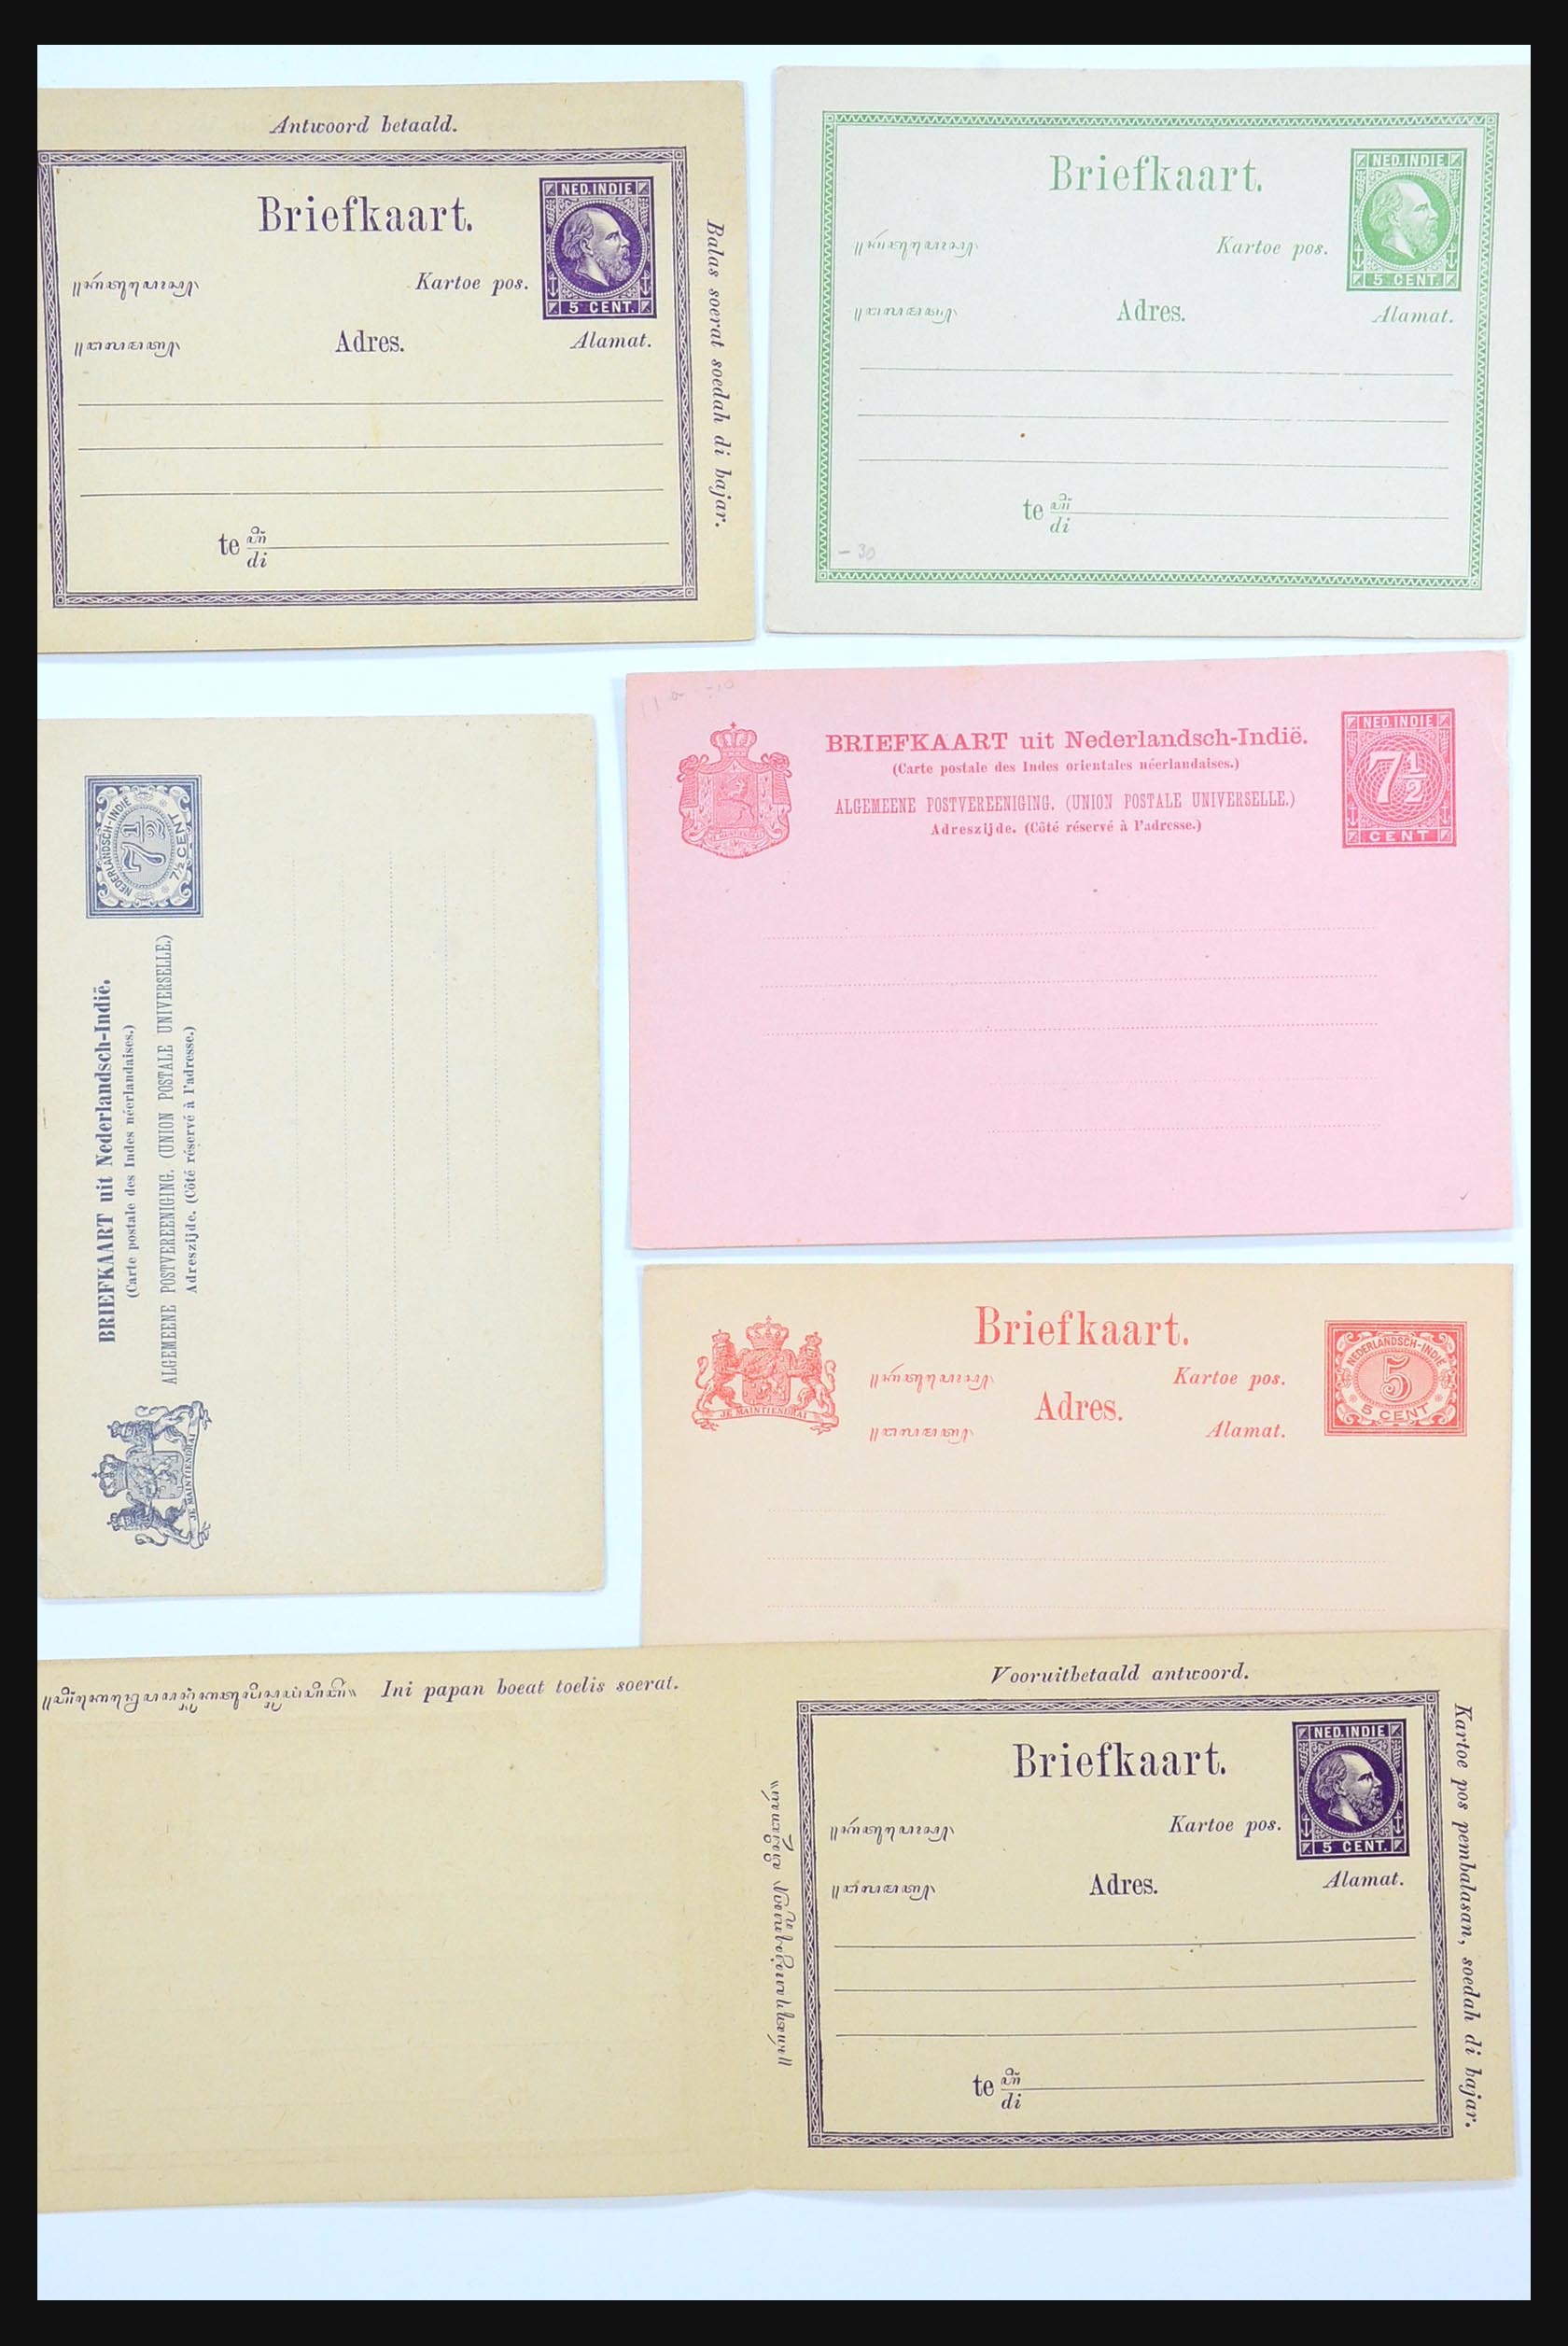 31361 001 - 31361 Netherlands Indies covers 1880-1950.